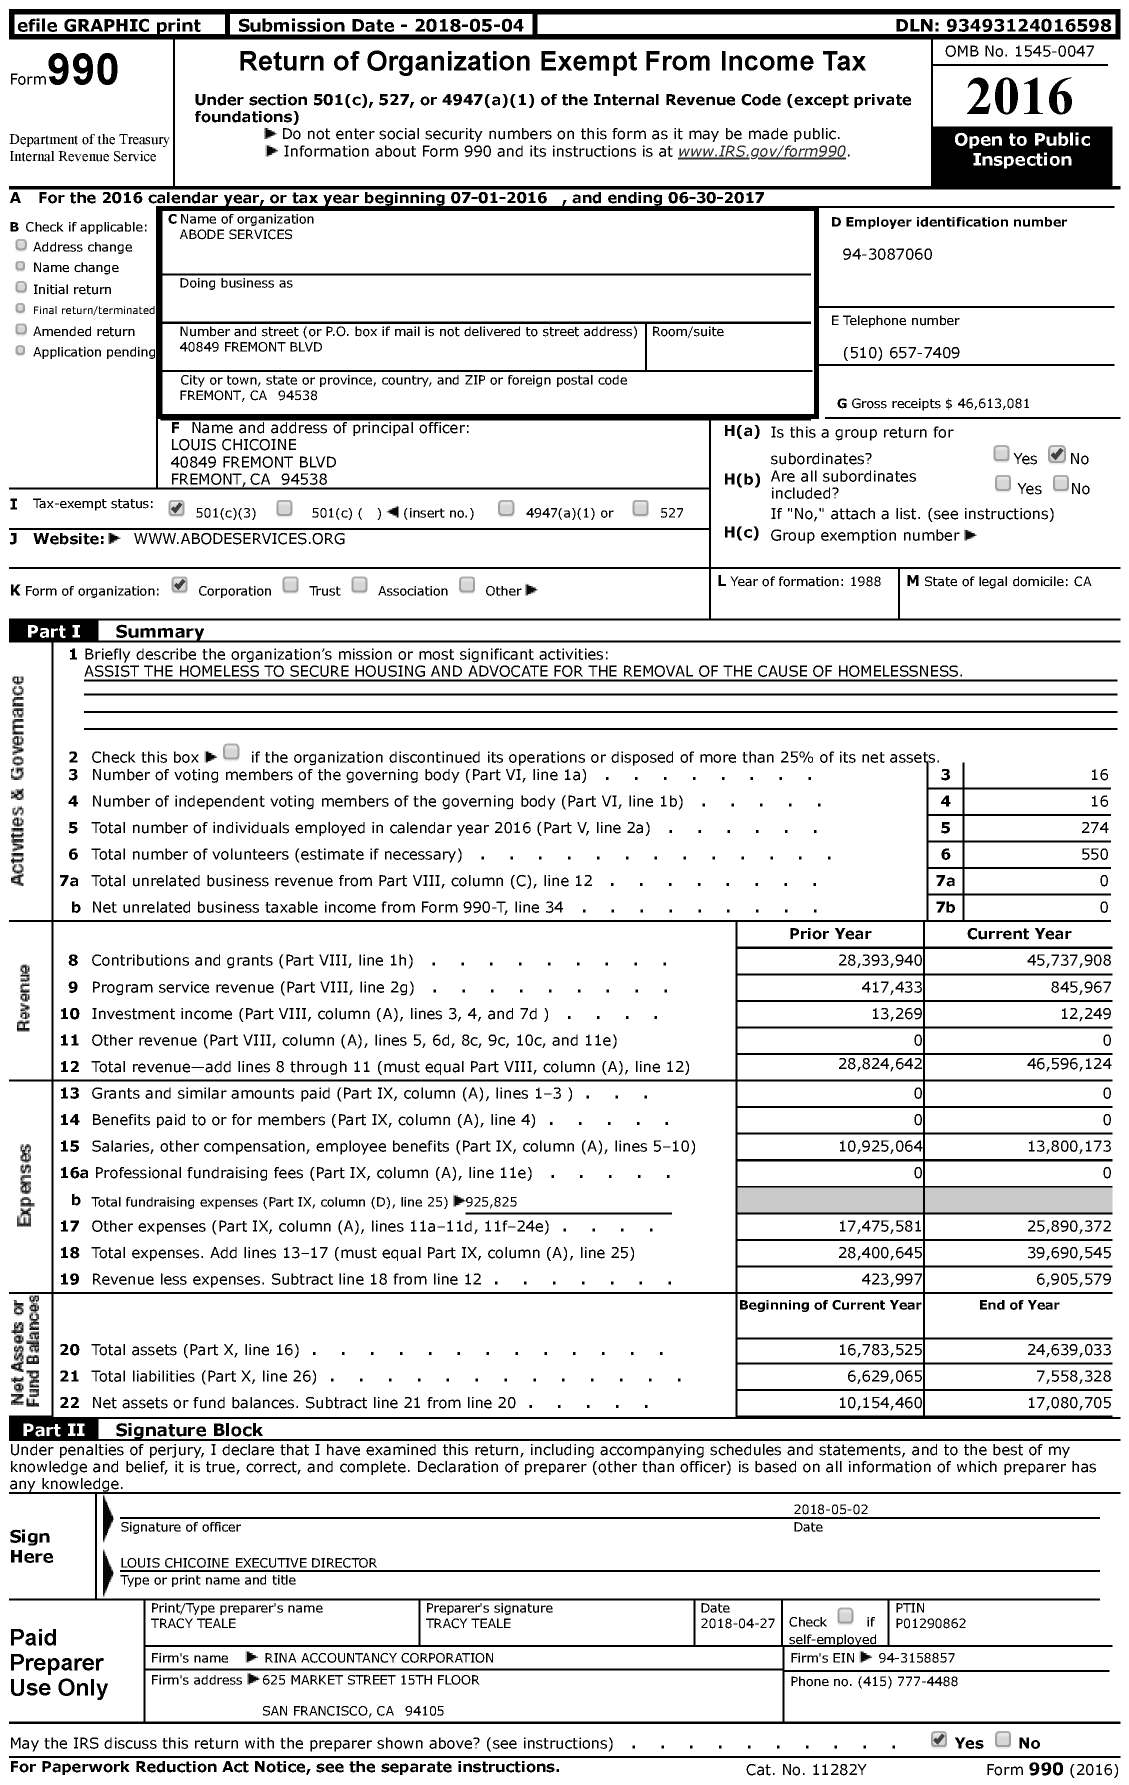 Image of first page of 2016 Form 990 for Abode Services